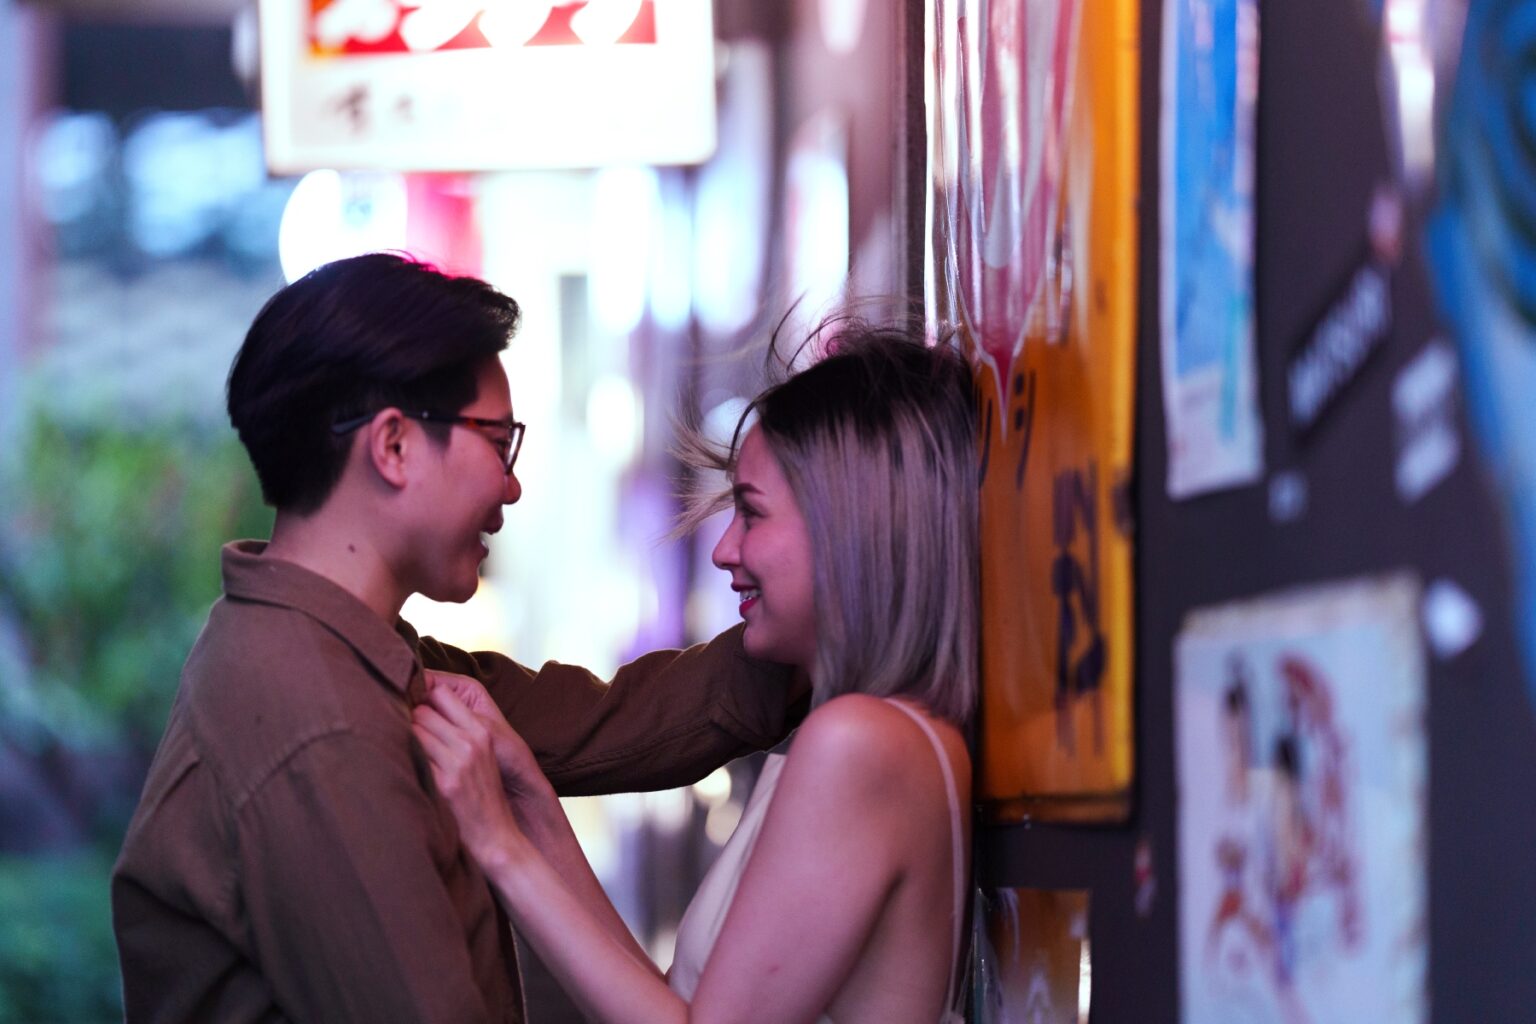 A lesbian couple stand closely and look at each other in an illuminated street